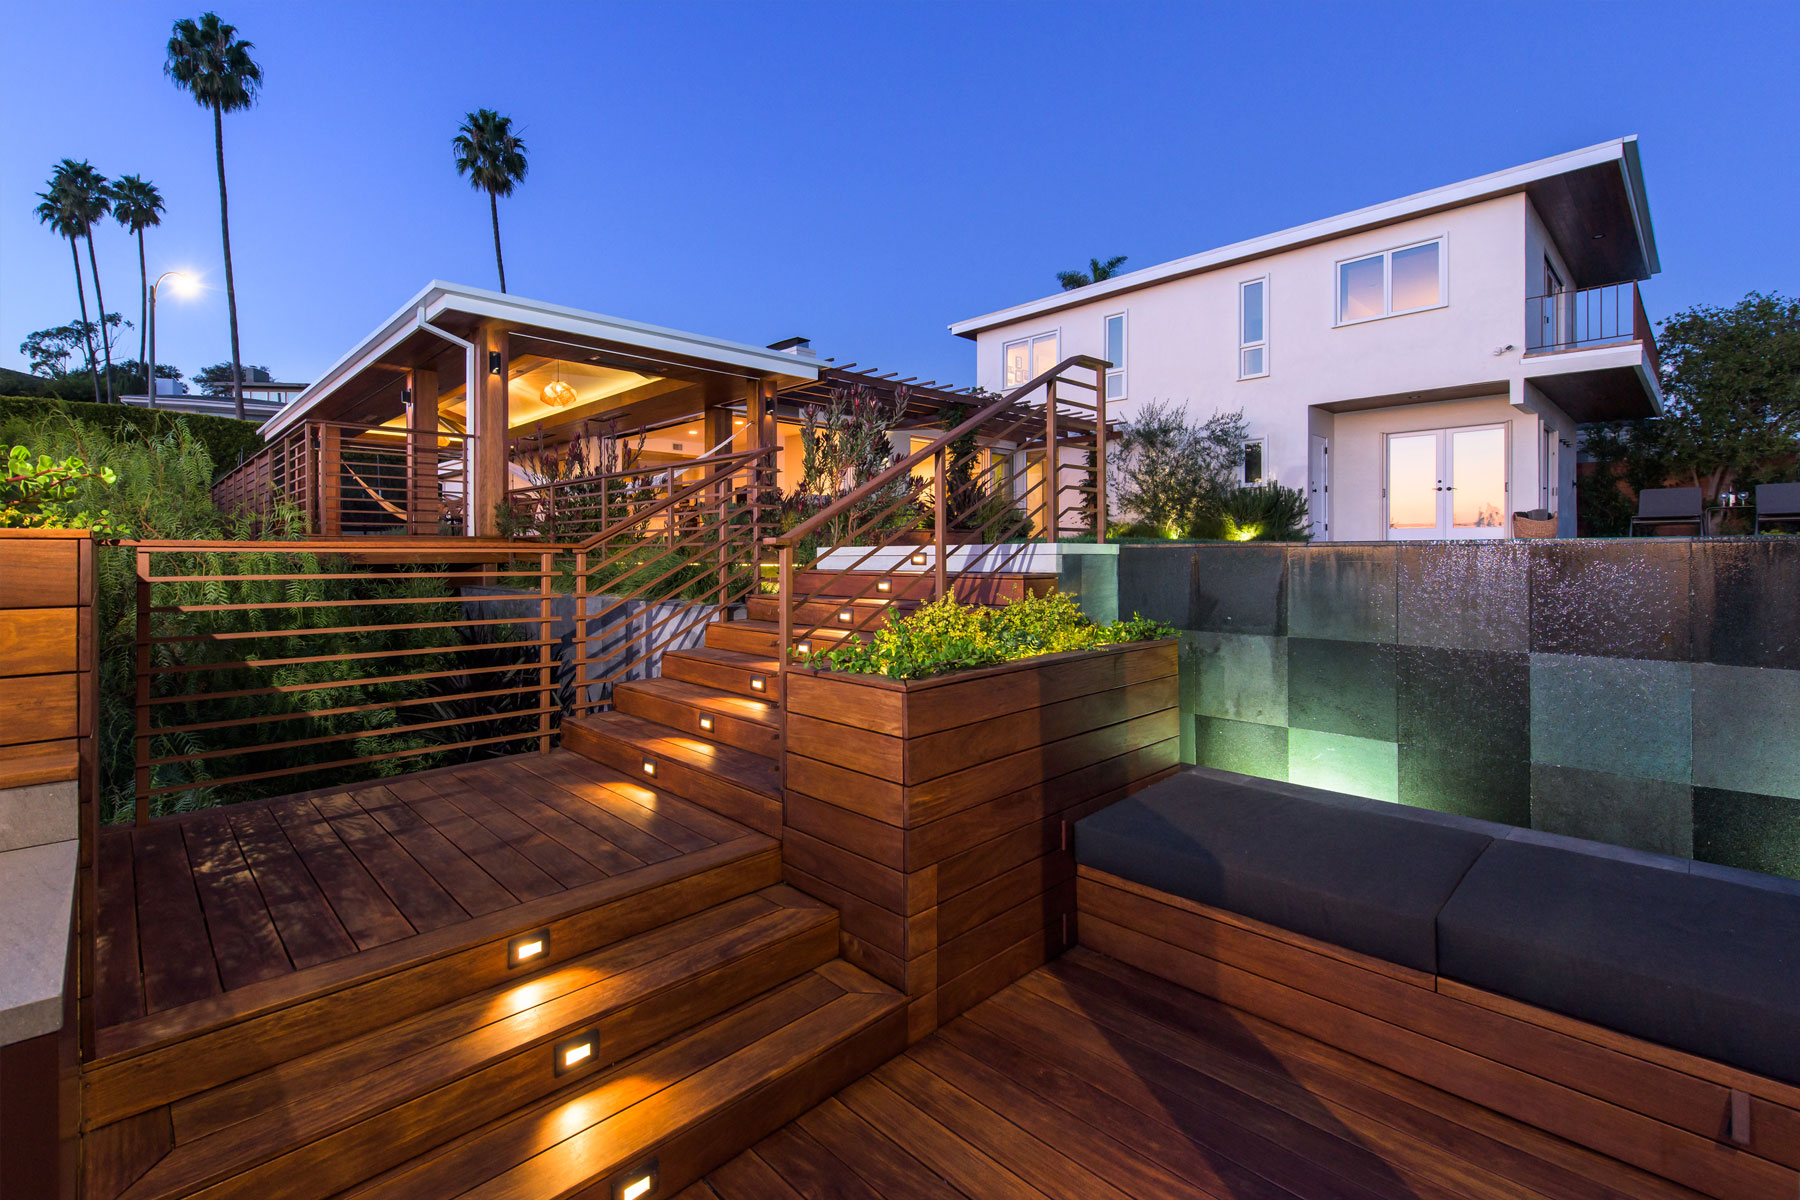 Hillside Southern California backyard renovation in Pacific Palisades by Krueger Architects